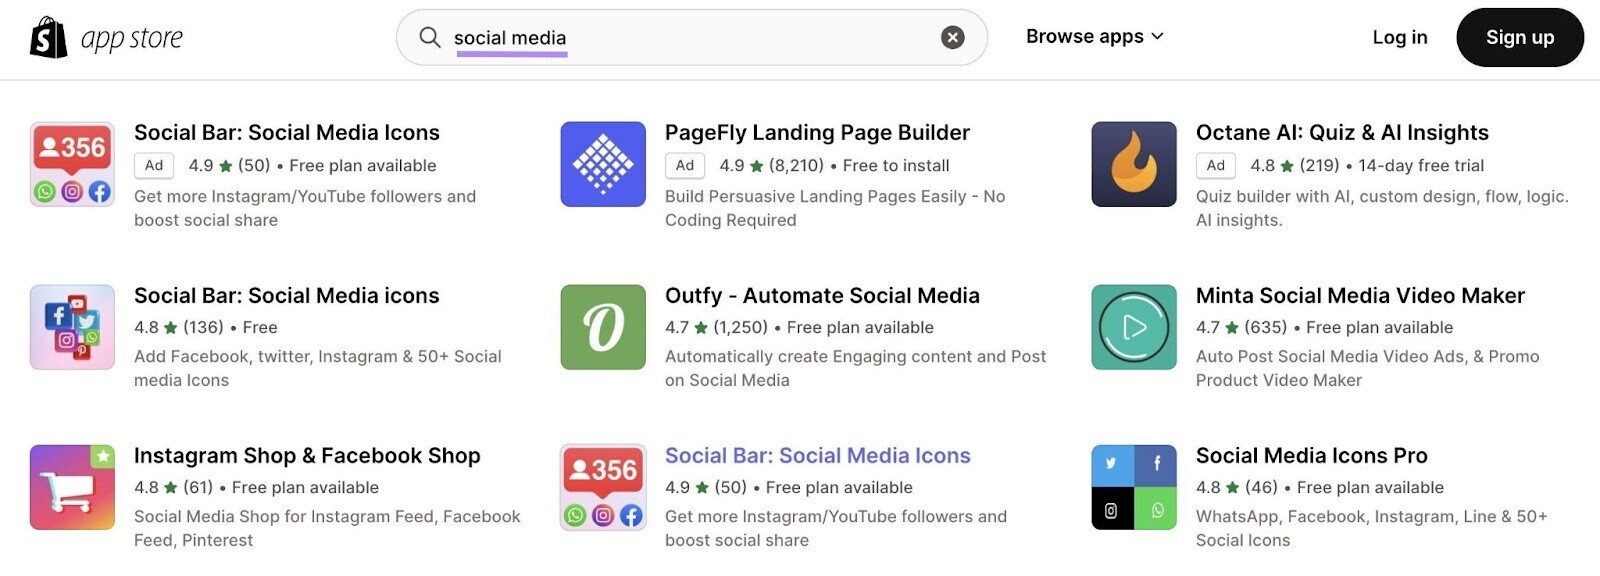 results for "social media" search in Shopify App Store